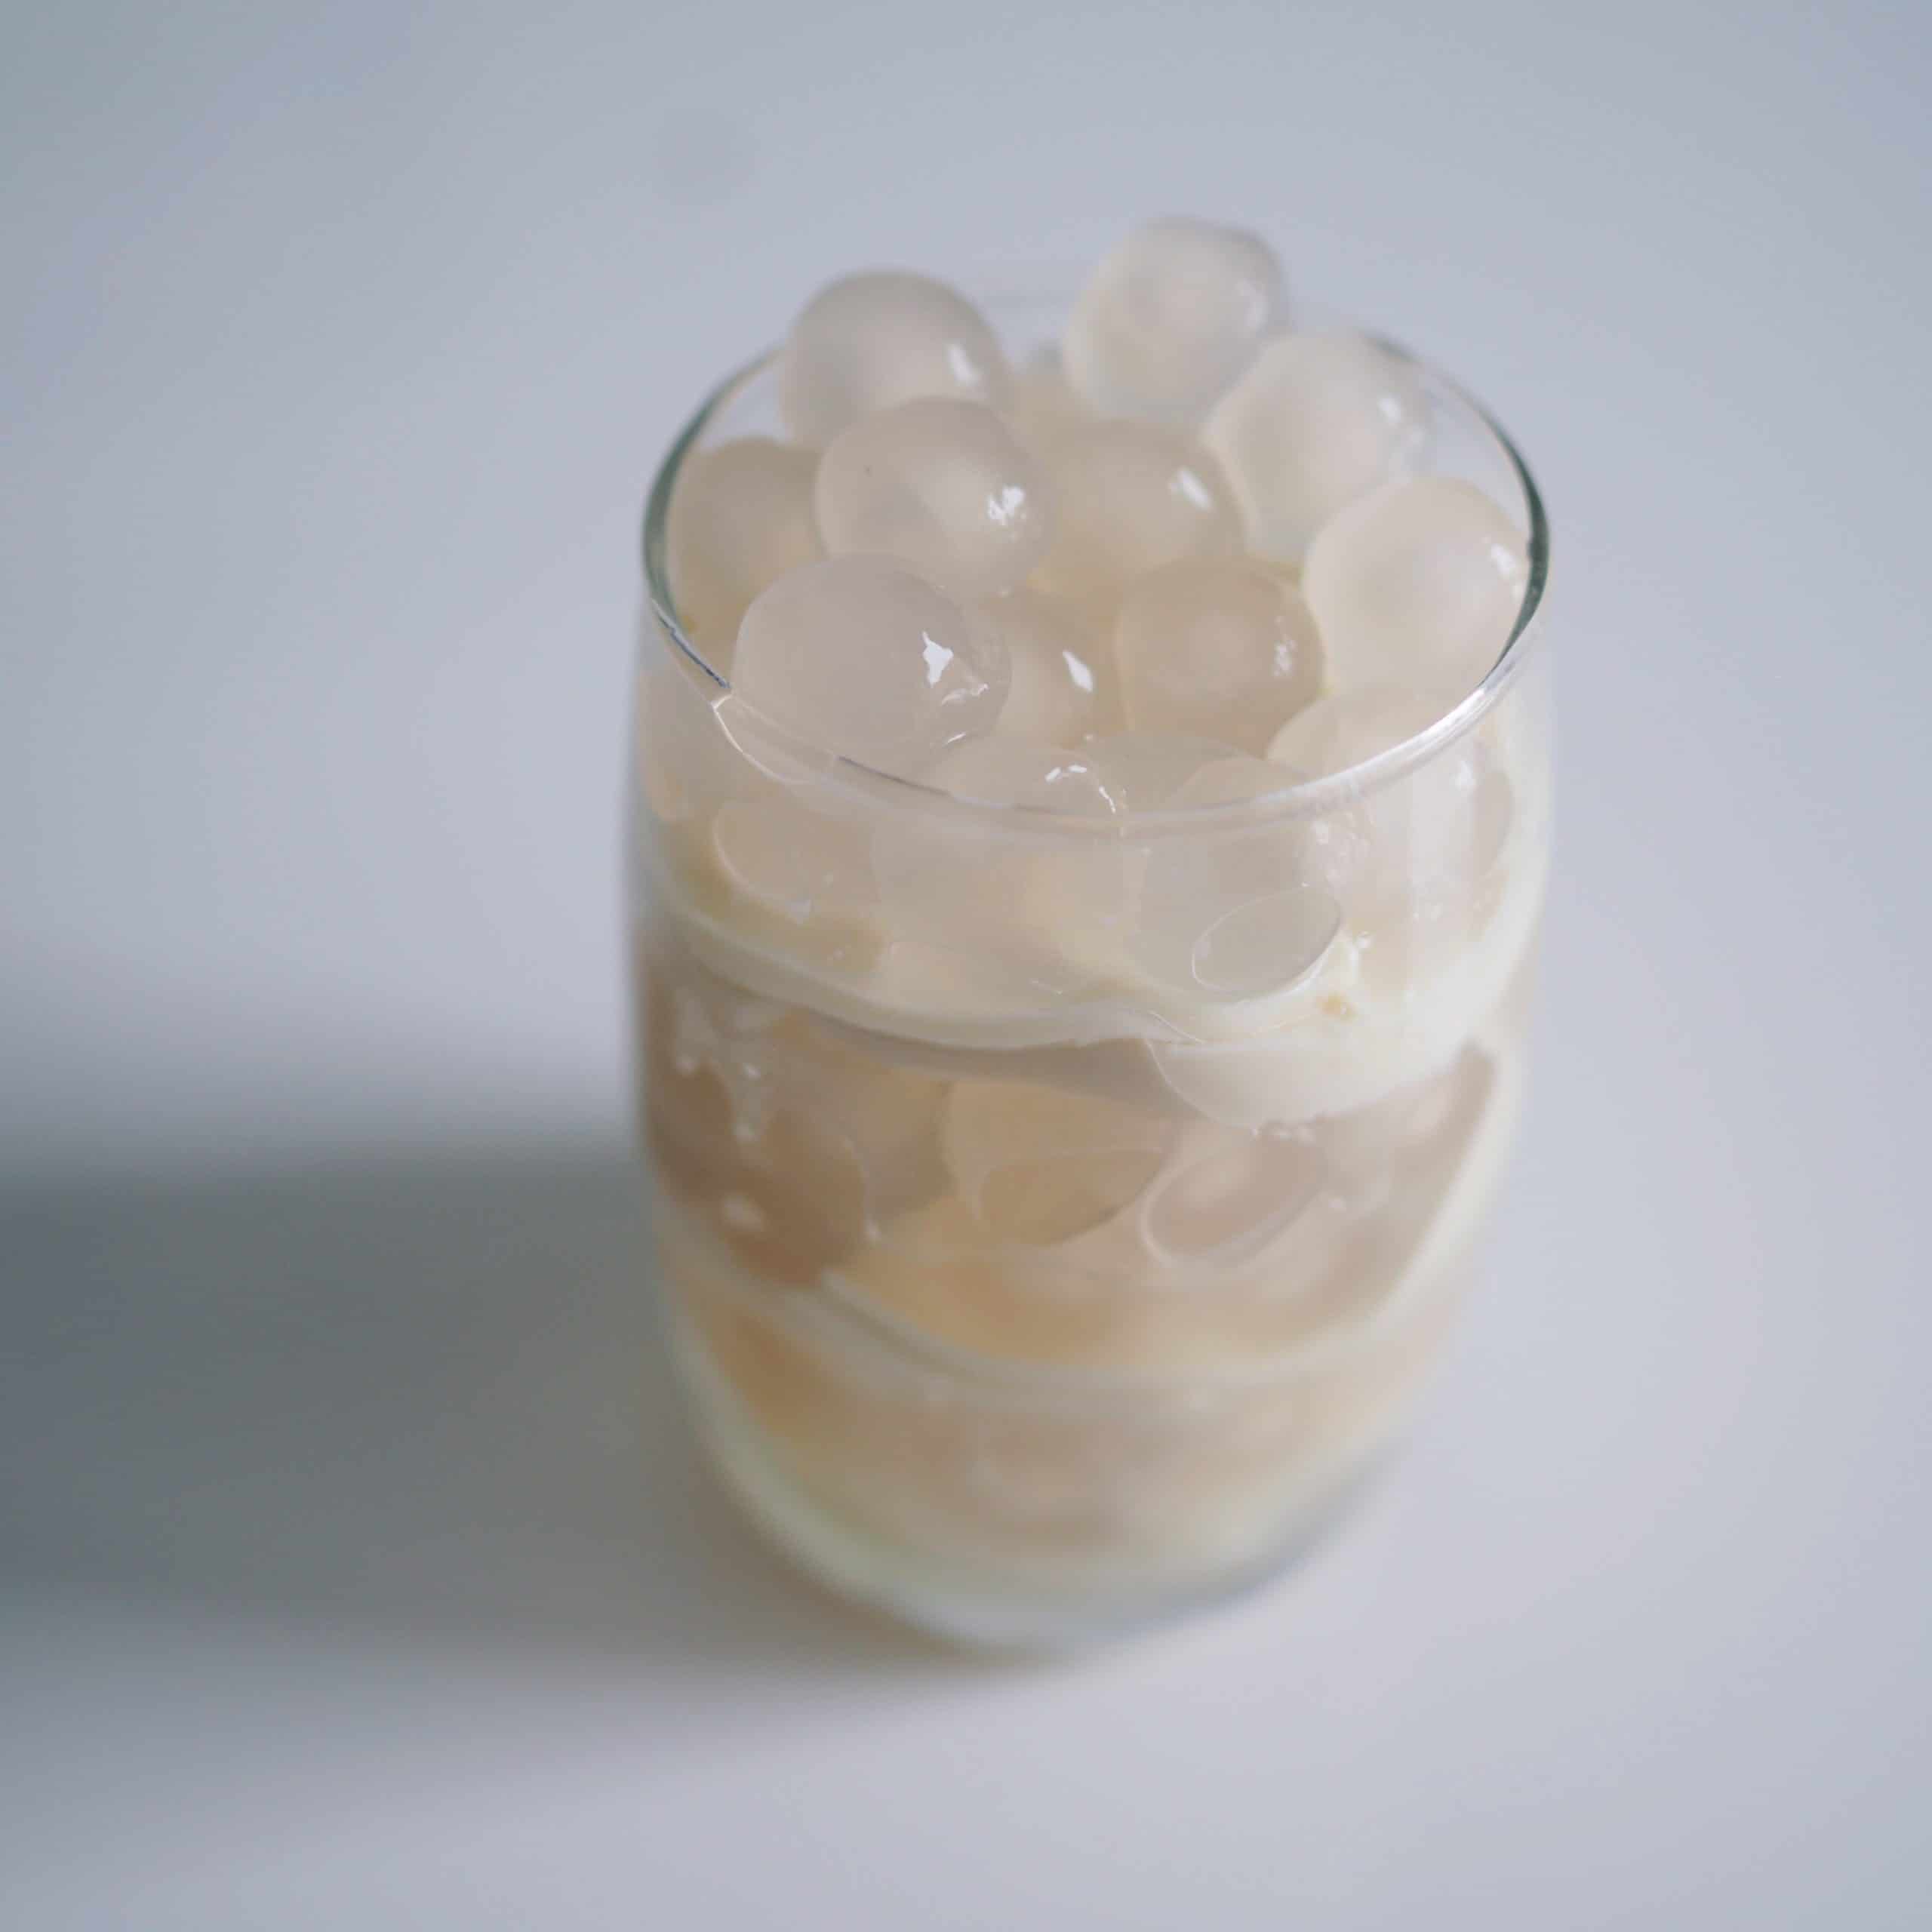 layer tofu and tapioca pearls in a bowl or glass